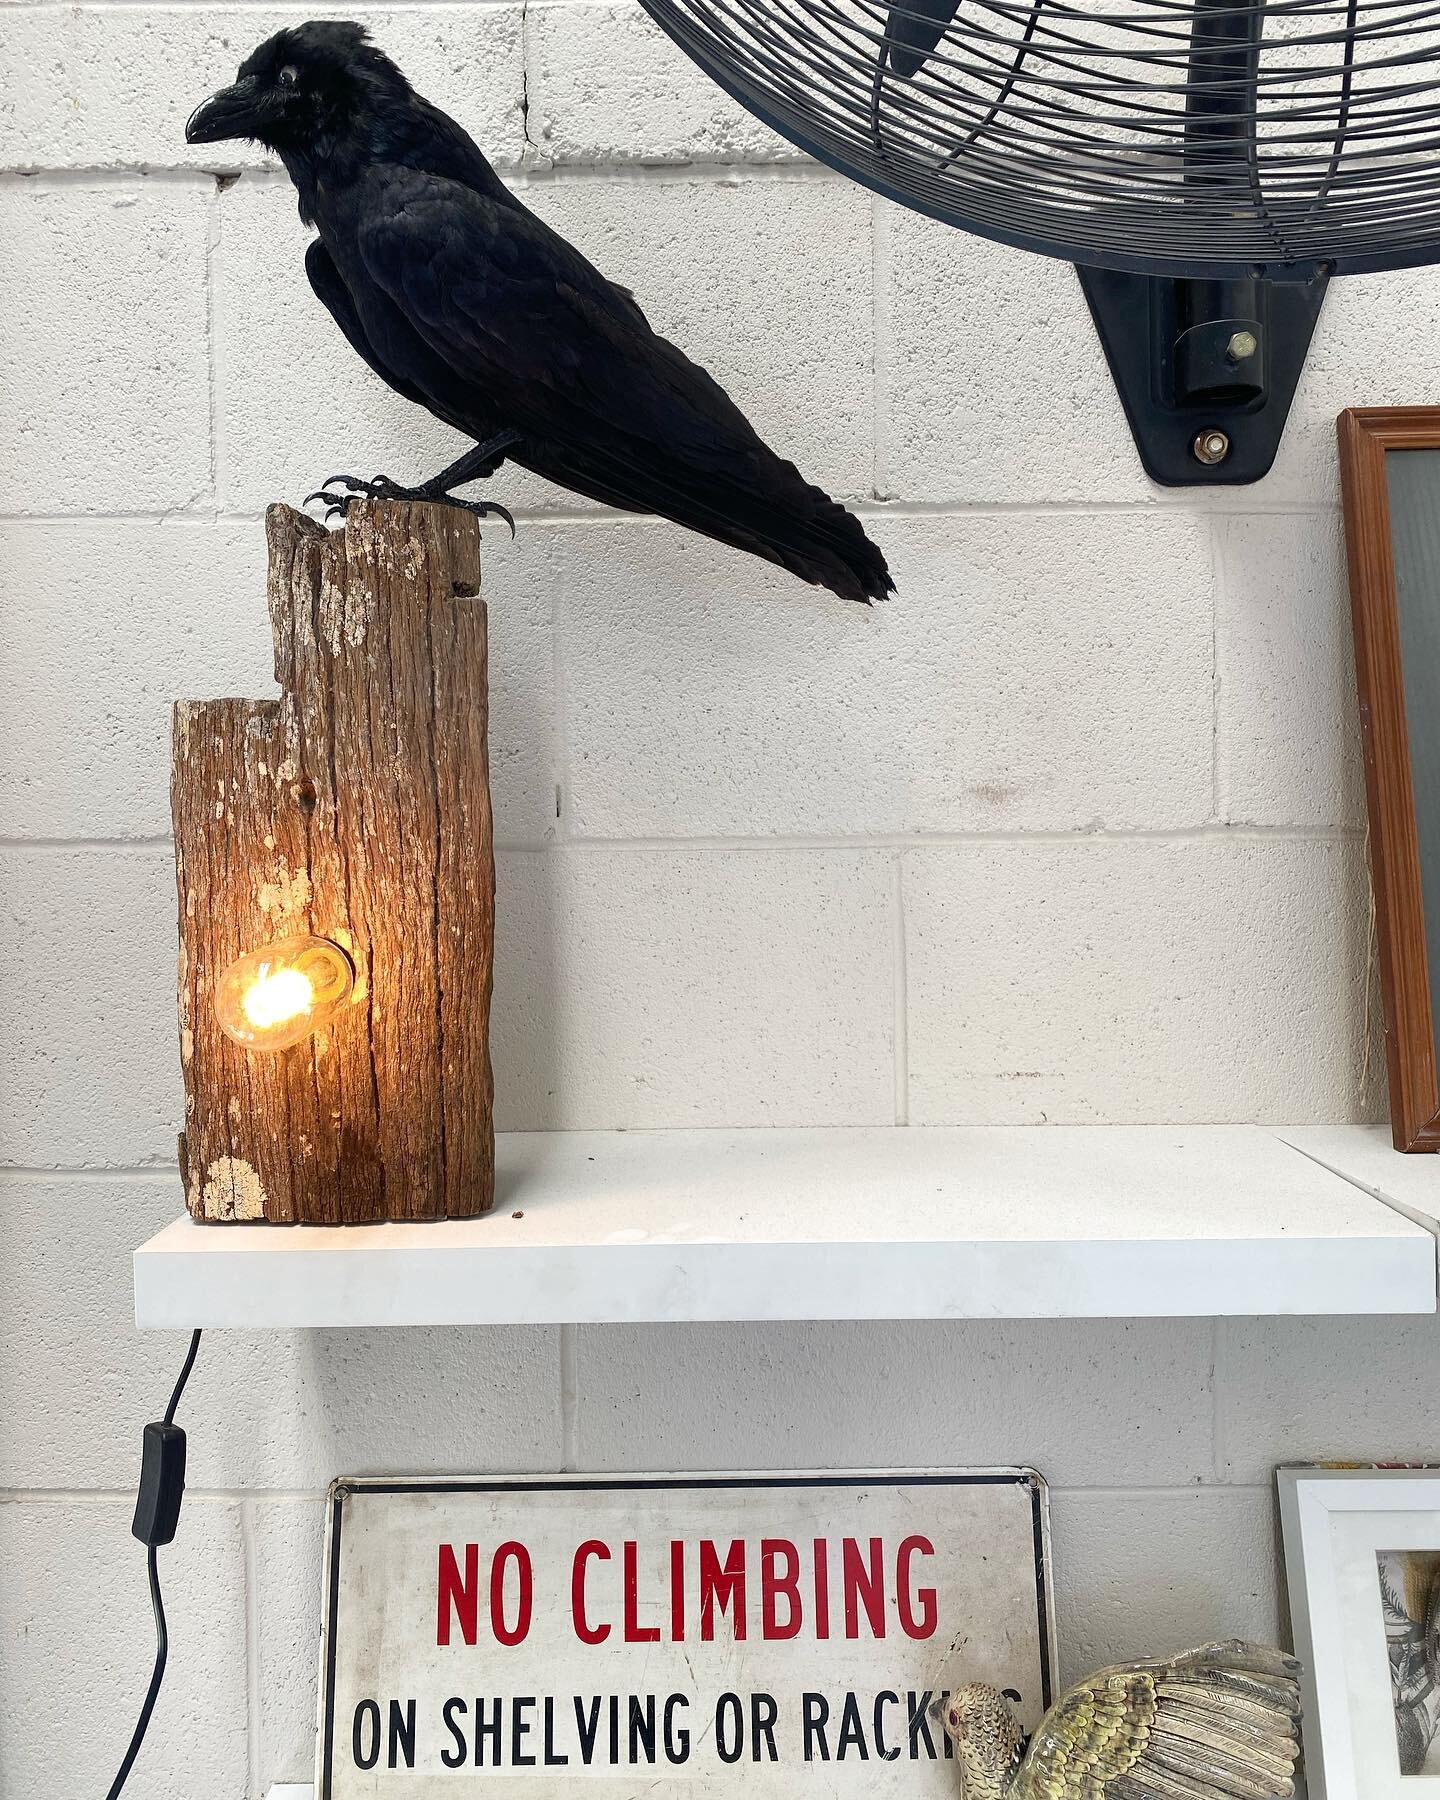 I found a dead crow in the park and now I have a crow lamp in my studio! Thank you @rosefarmmoi for your excellent taxidermy